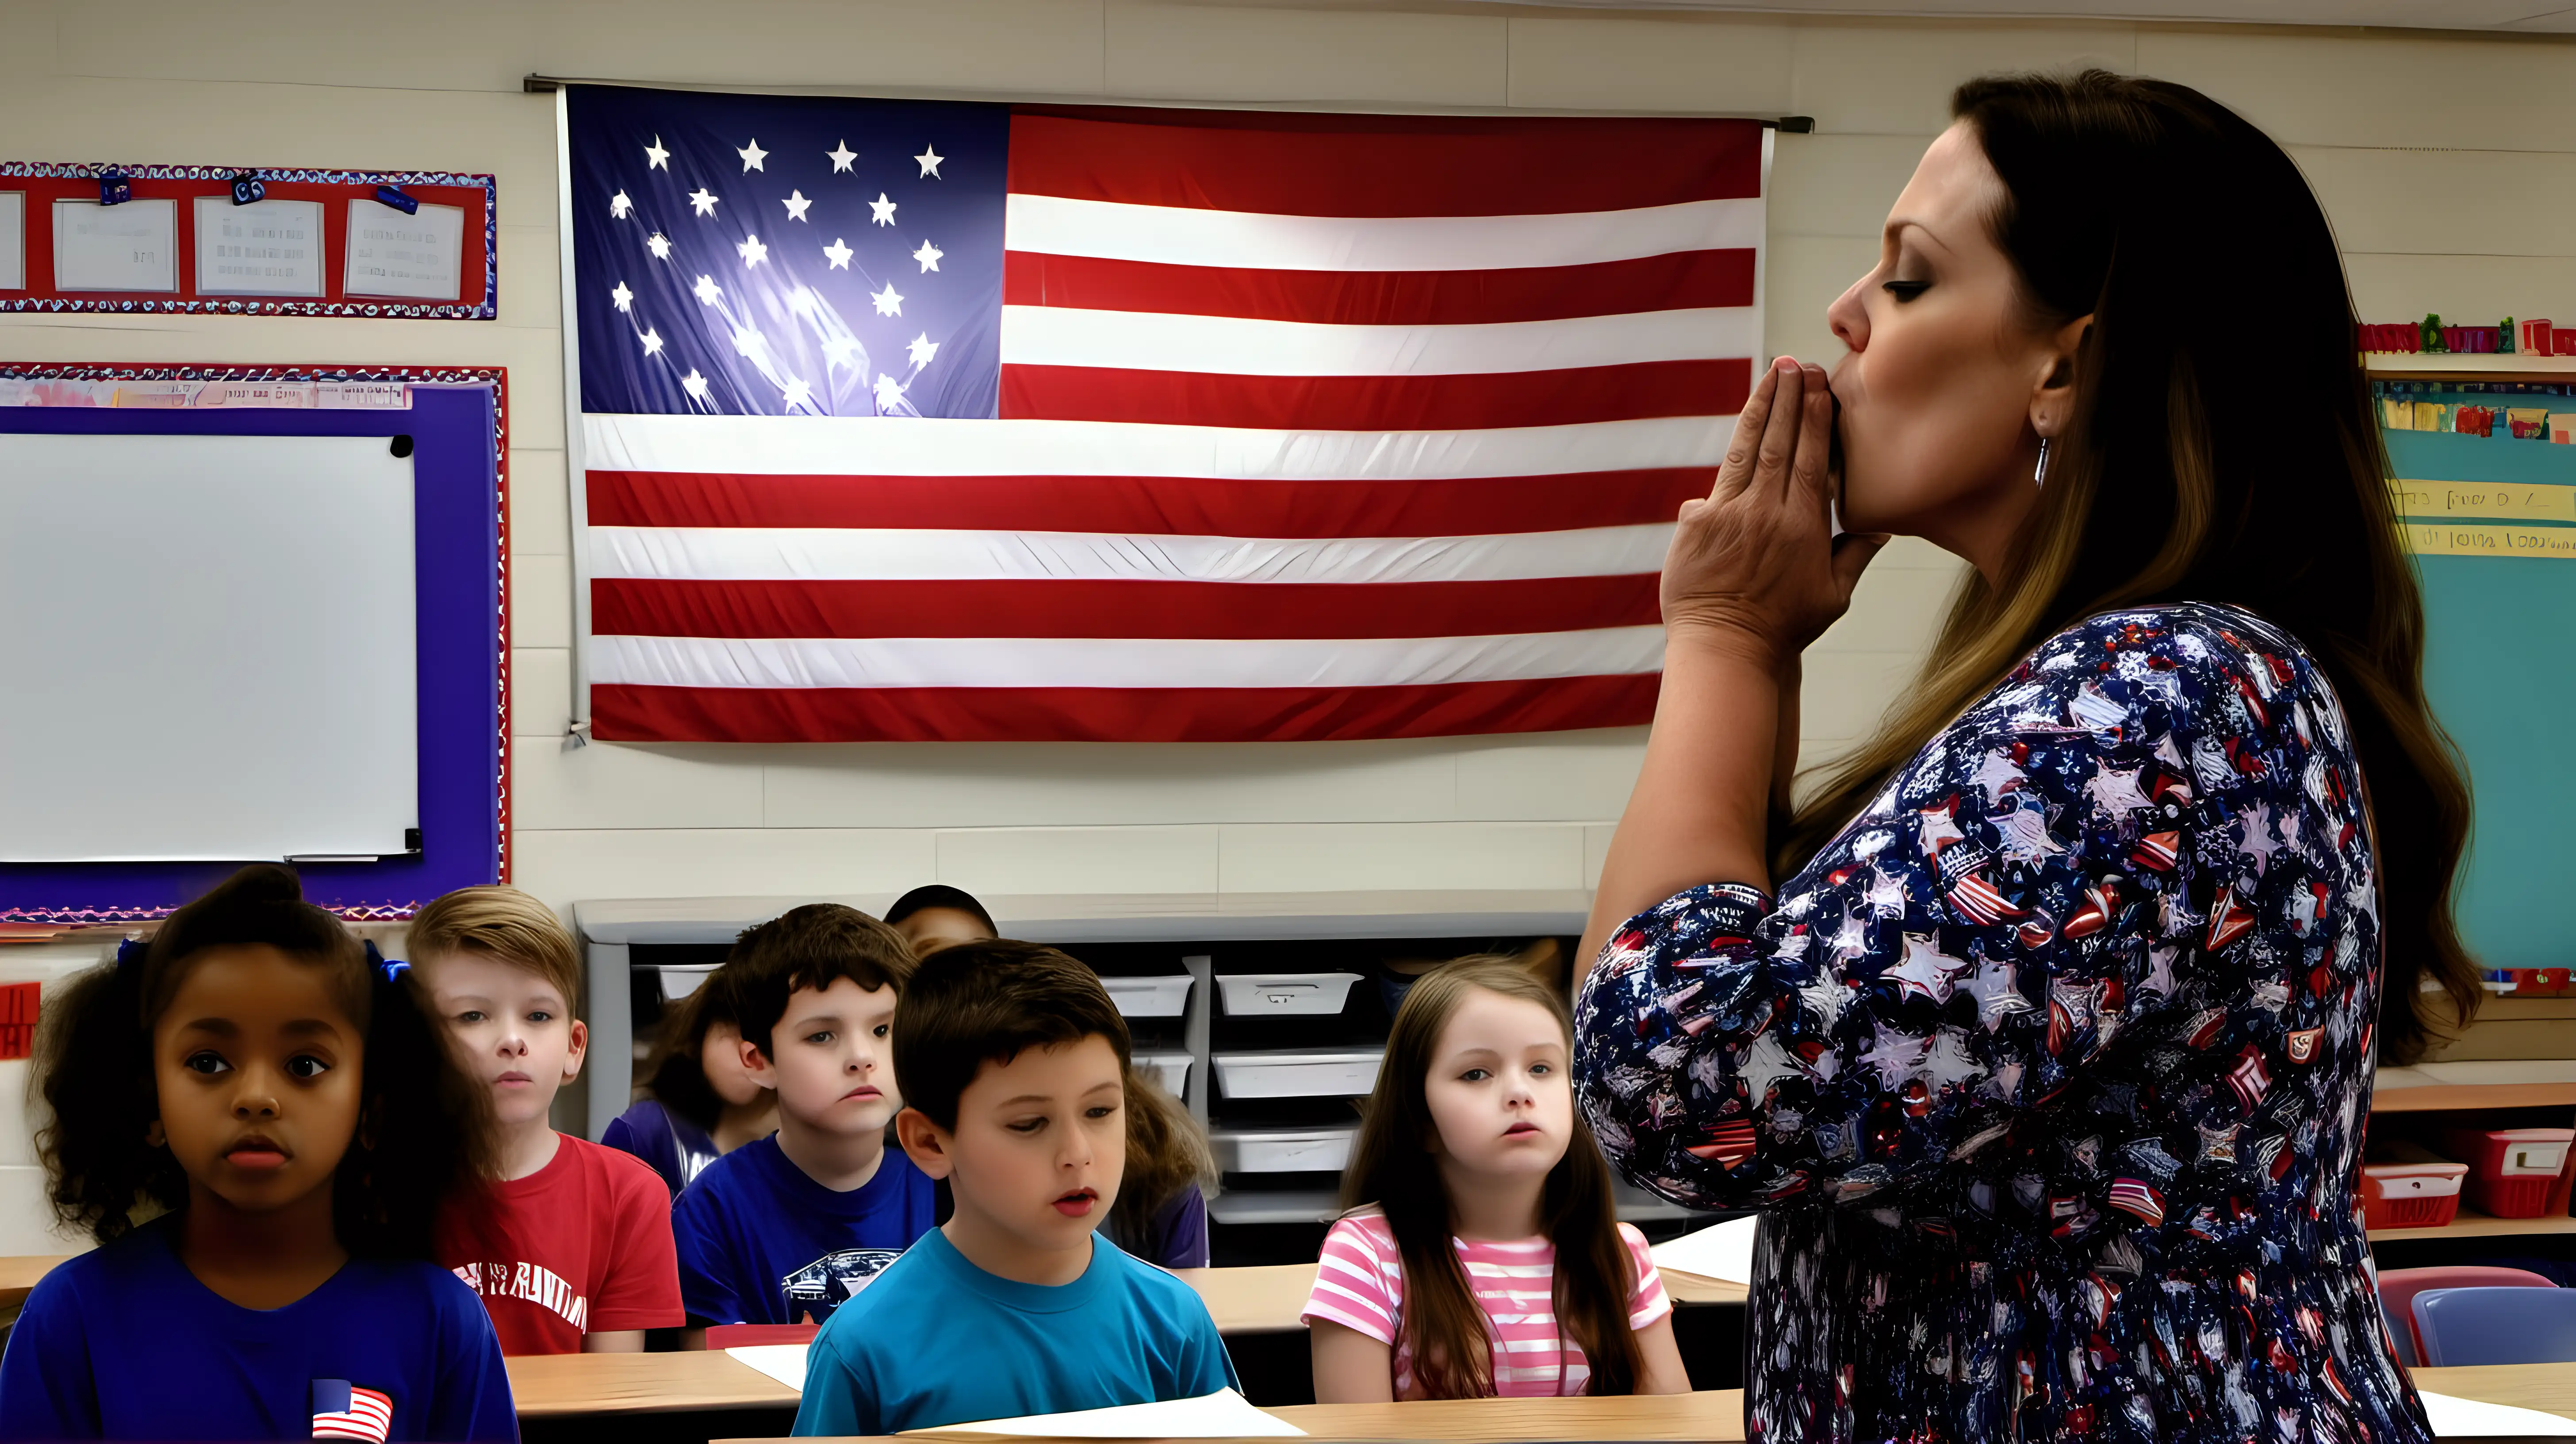 A teacher, standing in front of their classroom, kisses the American flag as they lead students in the Pledge of Allegiance, instilling a sense of patriotism and respect.
